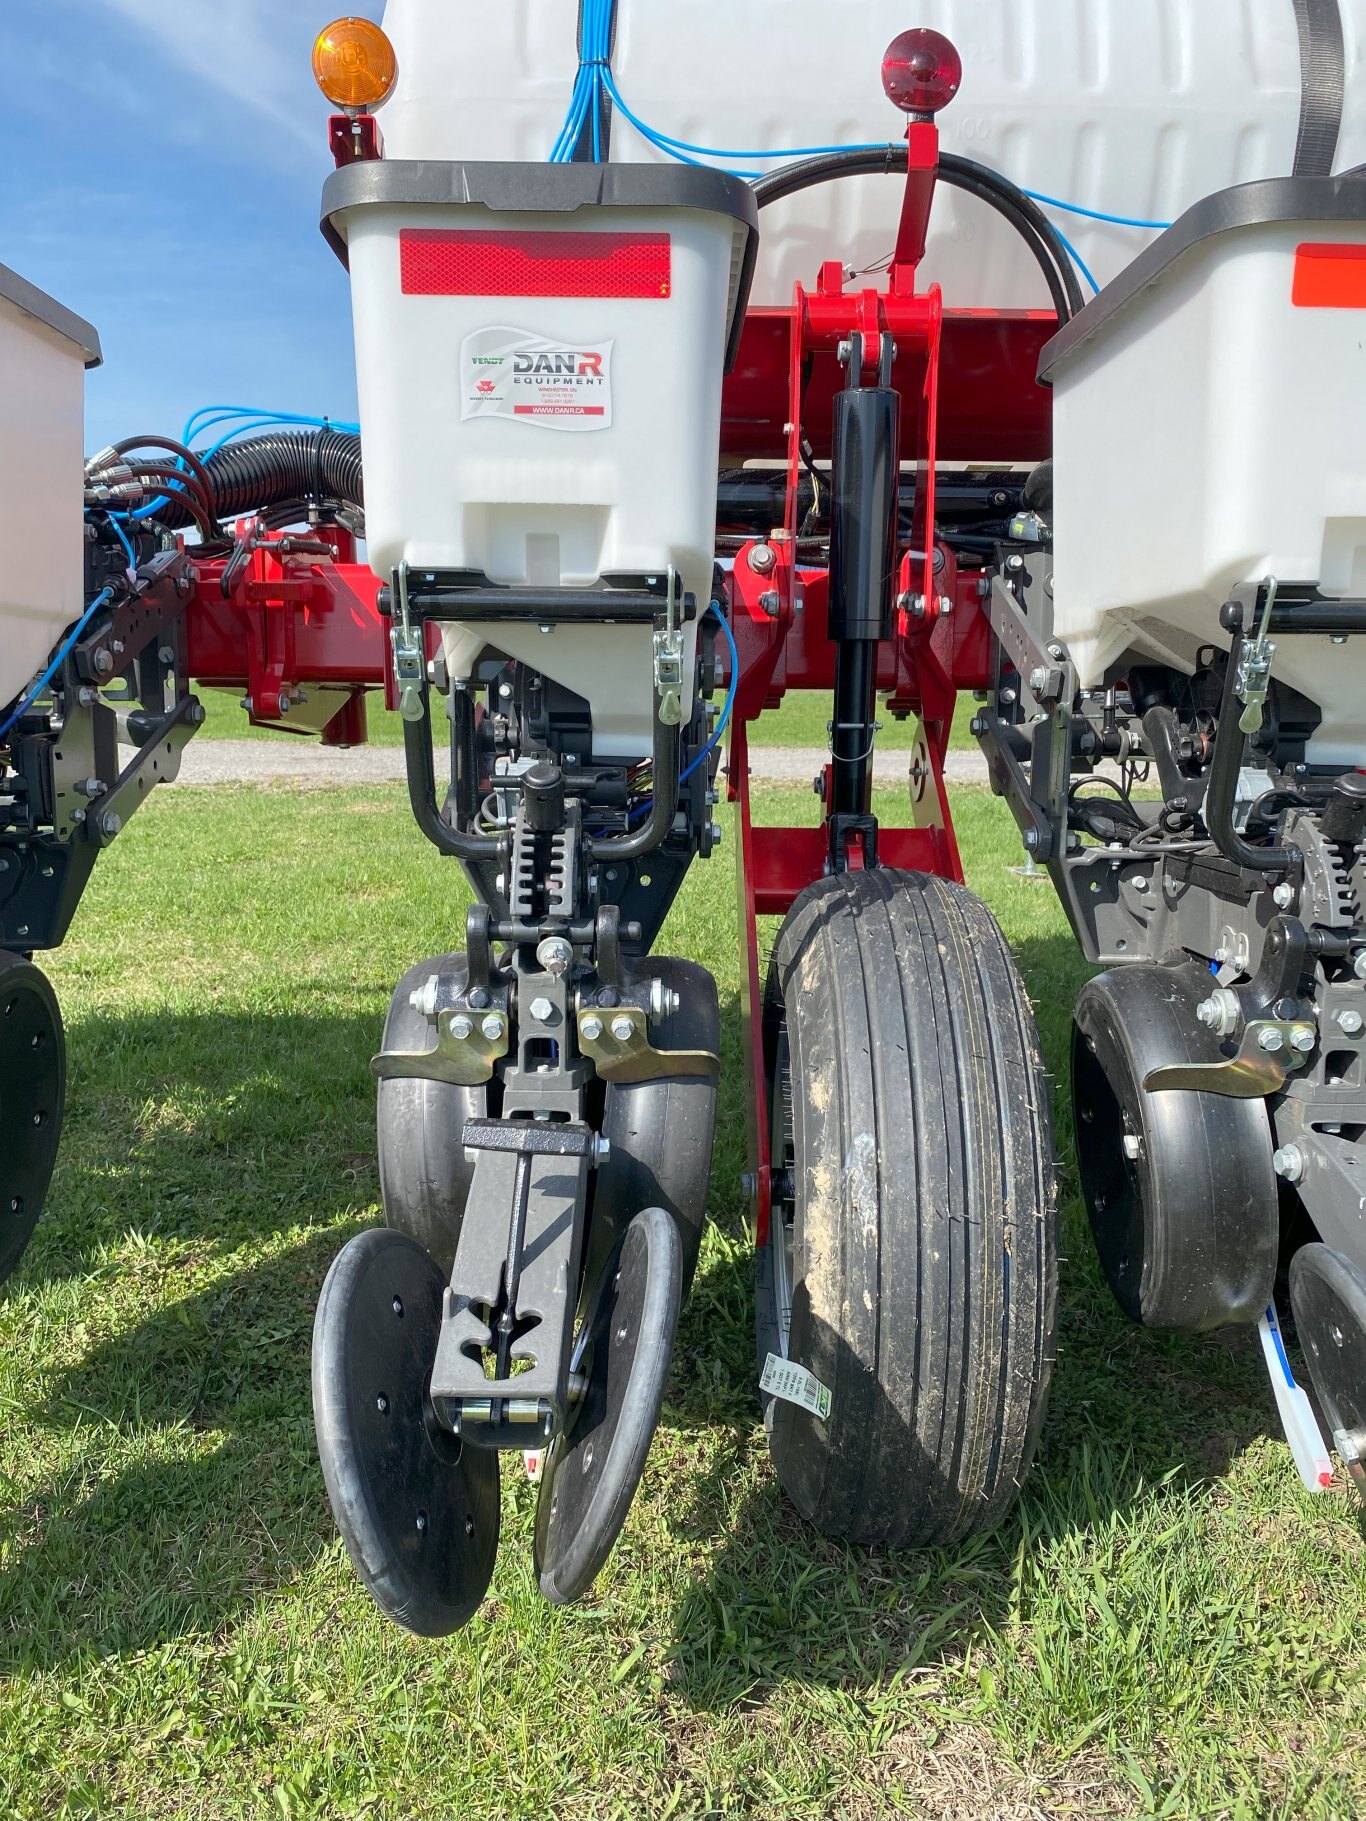 Massey Ferguson 12 Row VW Series 1230 VE Wing Fold Planter with Row Marker and Residue Cleaner